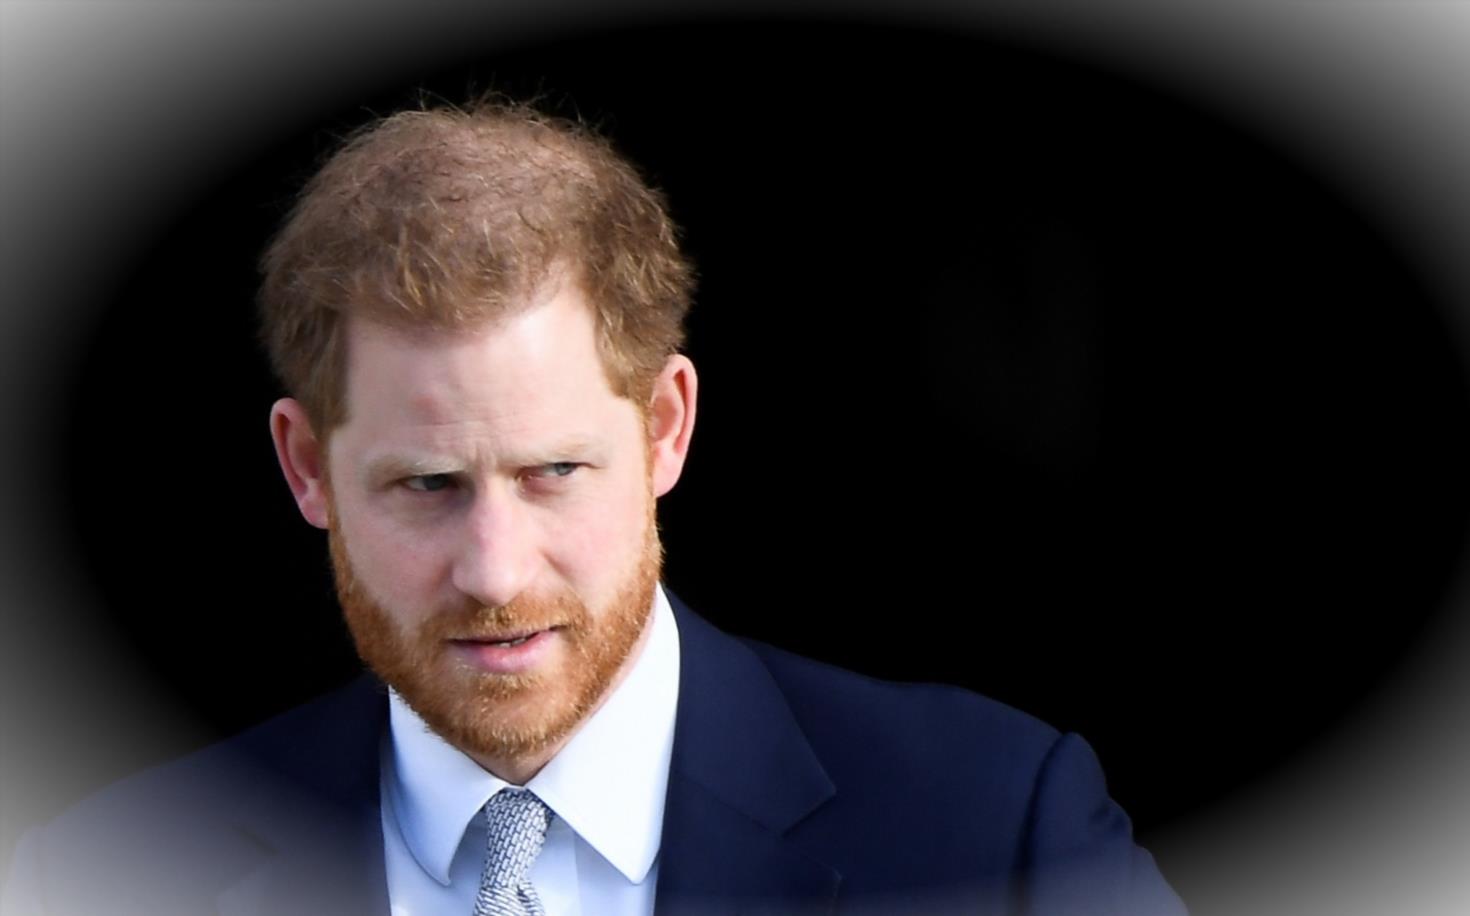 Prince Harry Faces Difficult Coronation Without Meghans Support81ee34w 5